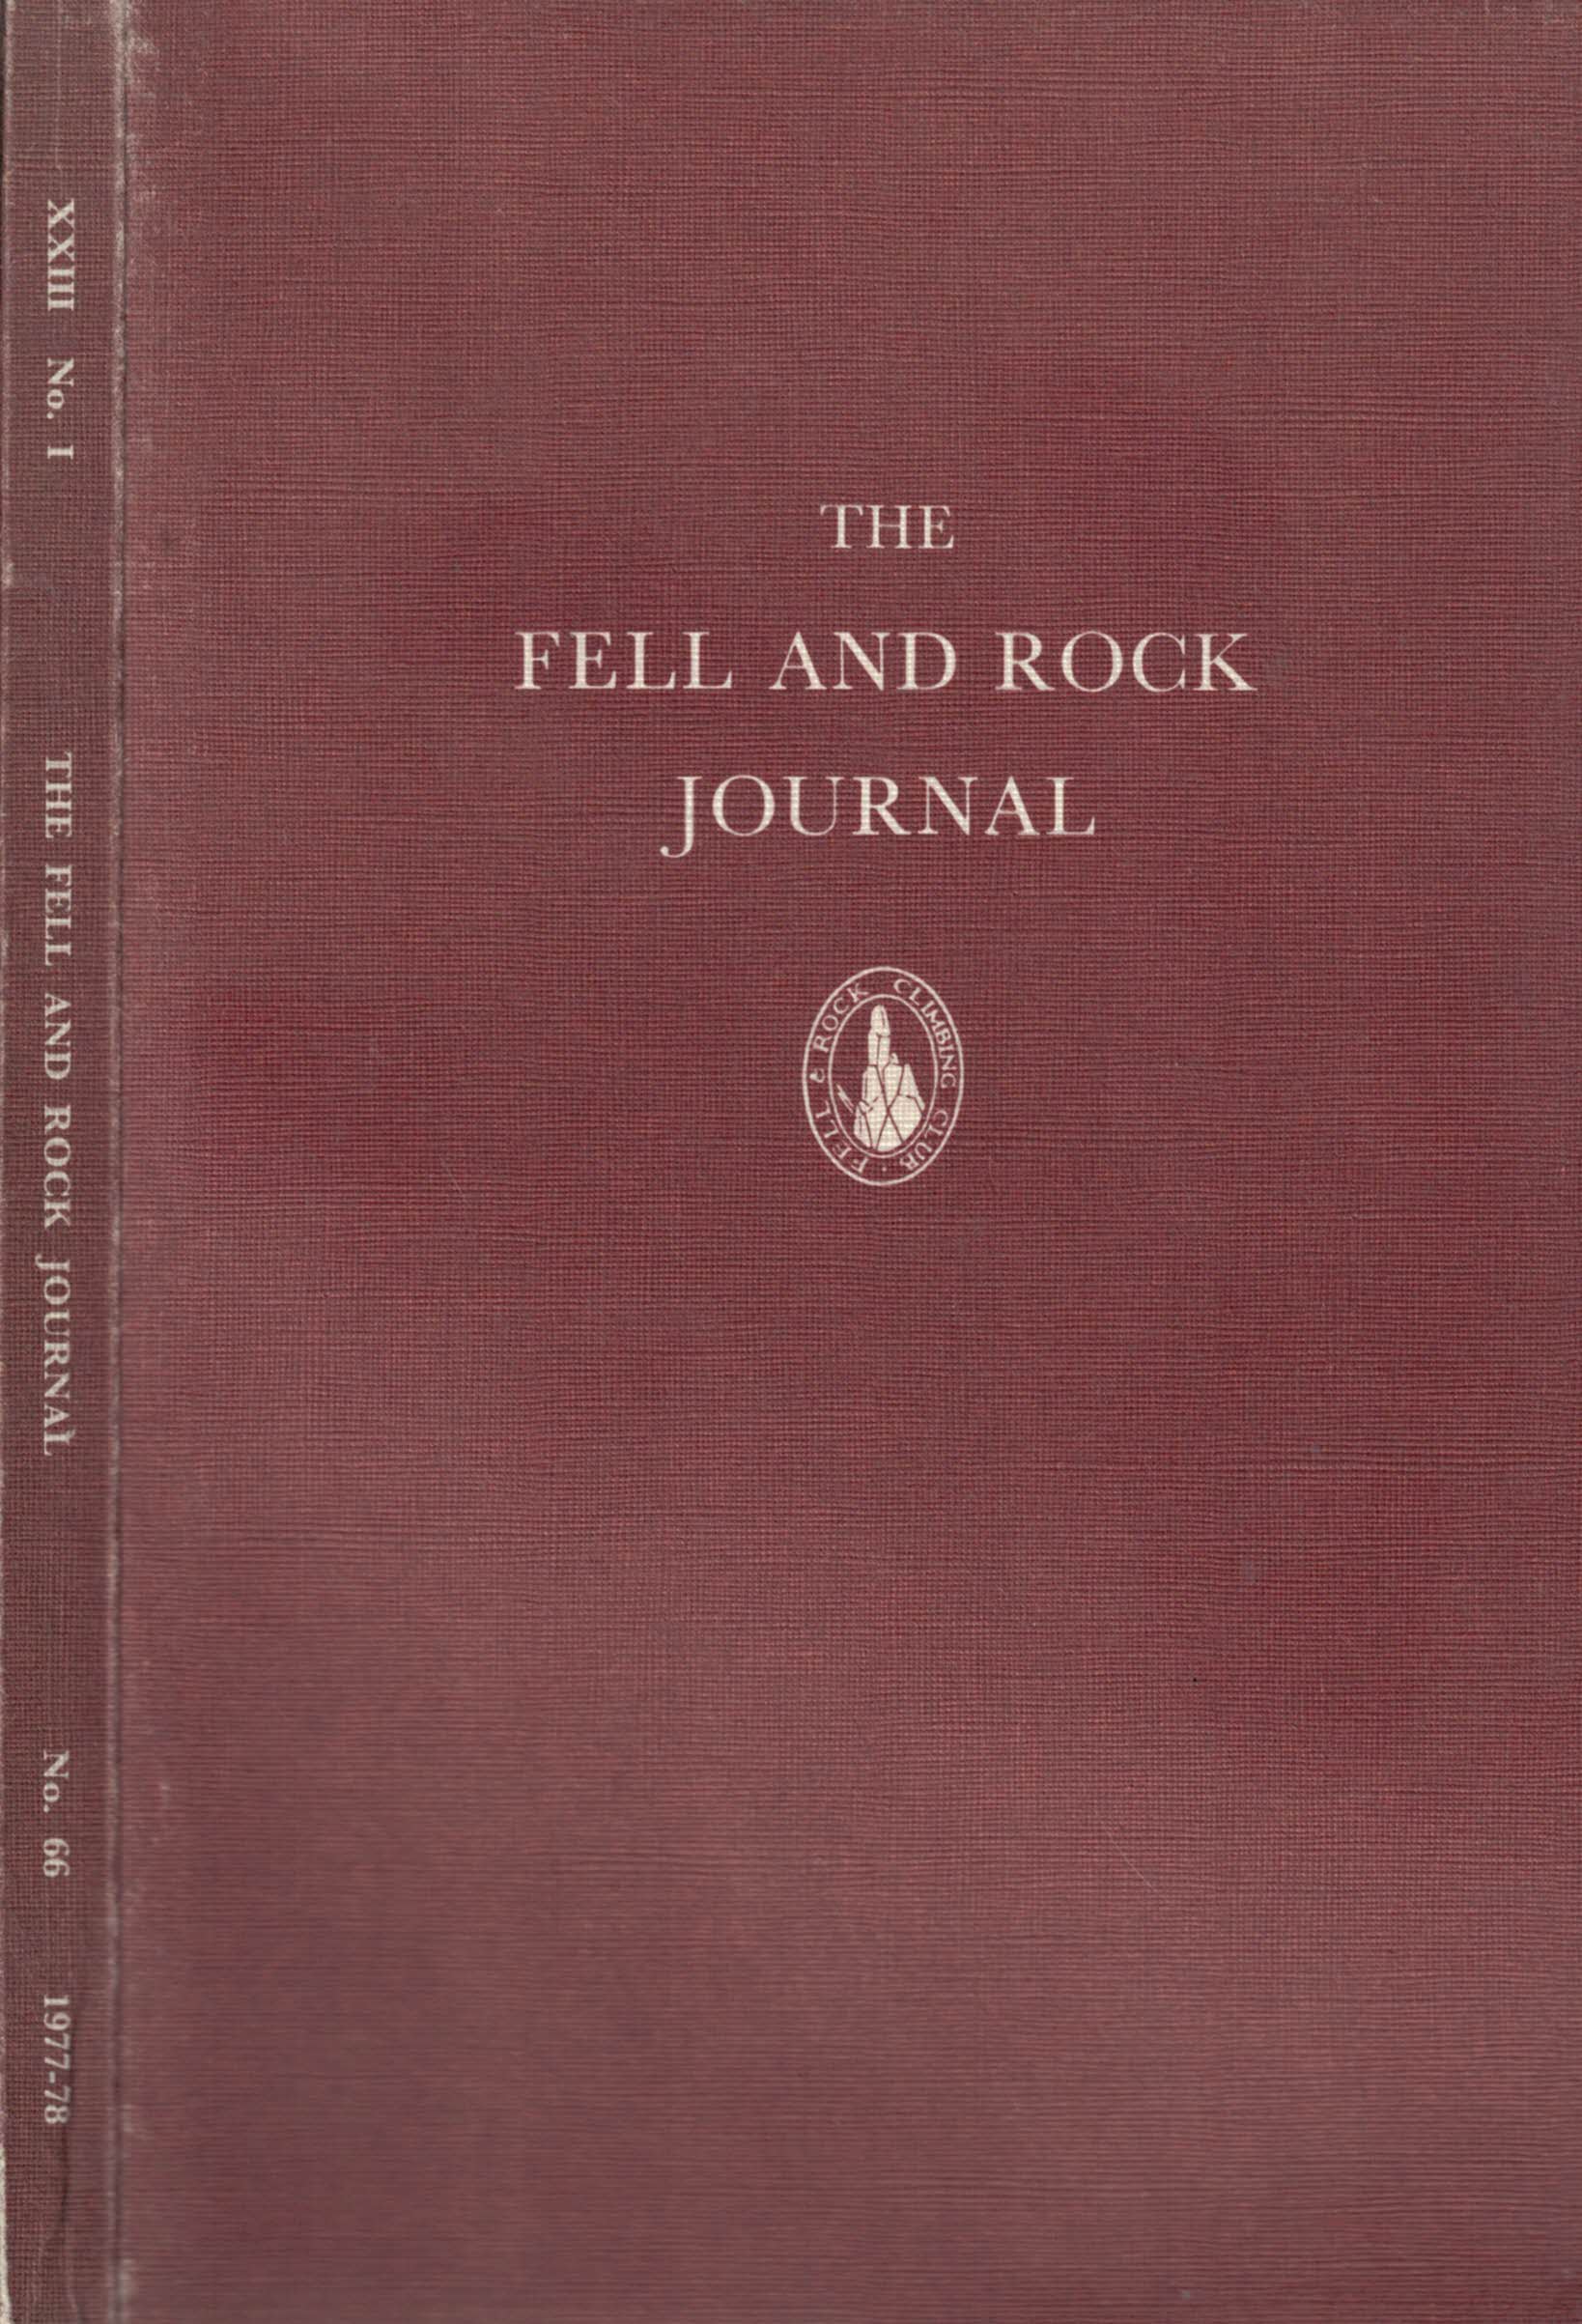 The Journal of the Fell & Rock Climbing Club of the English Lake District. No 66. (Volume 23 No1) 1978.